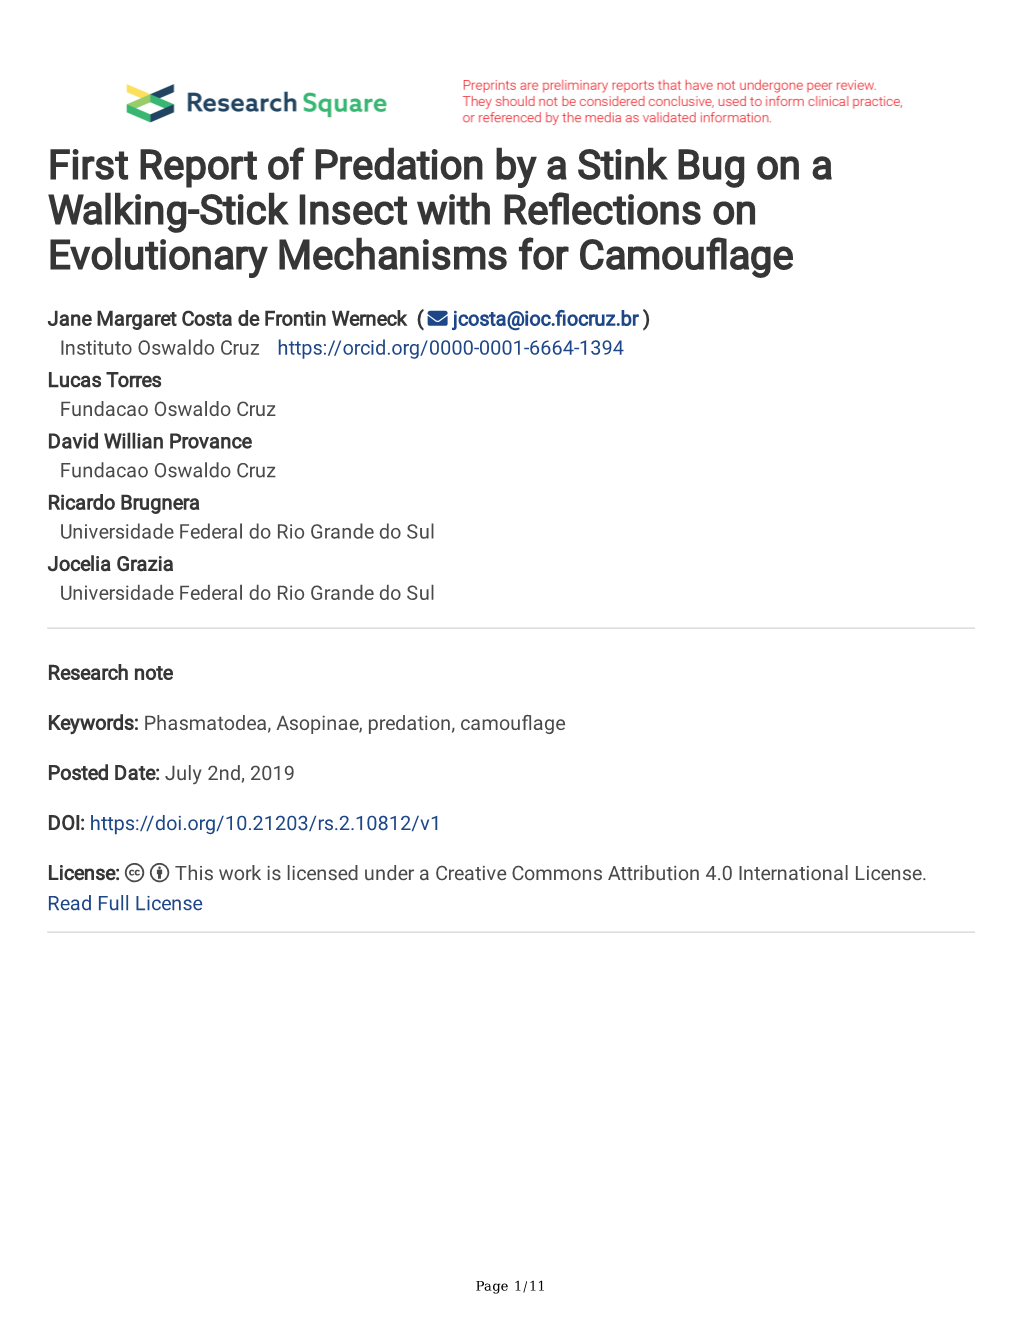 First Report of Predation by a Stink Bug on a Walking-Stick Insect with Refections on Evolutionary Mechanisms for Camoufage